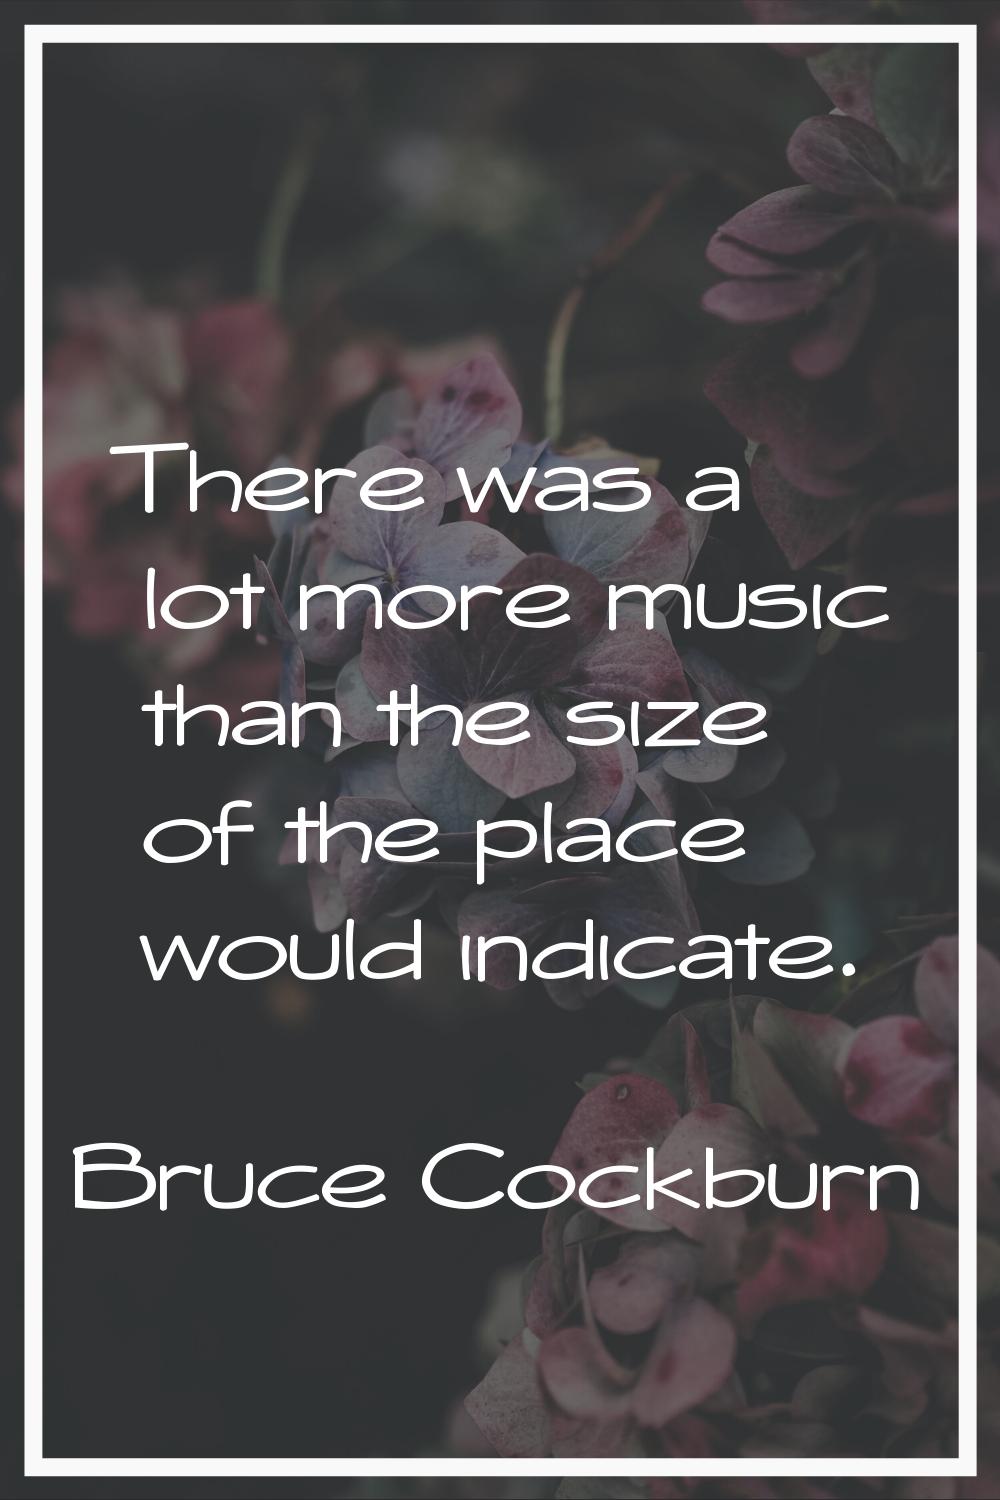 There was a lot more music than the size of the place would indicate.